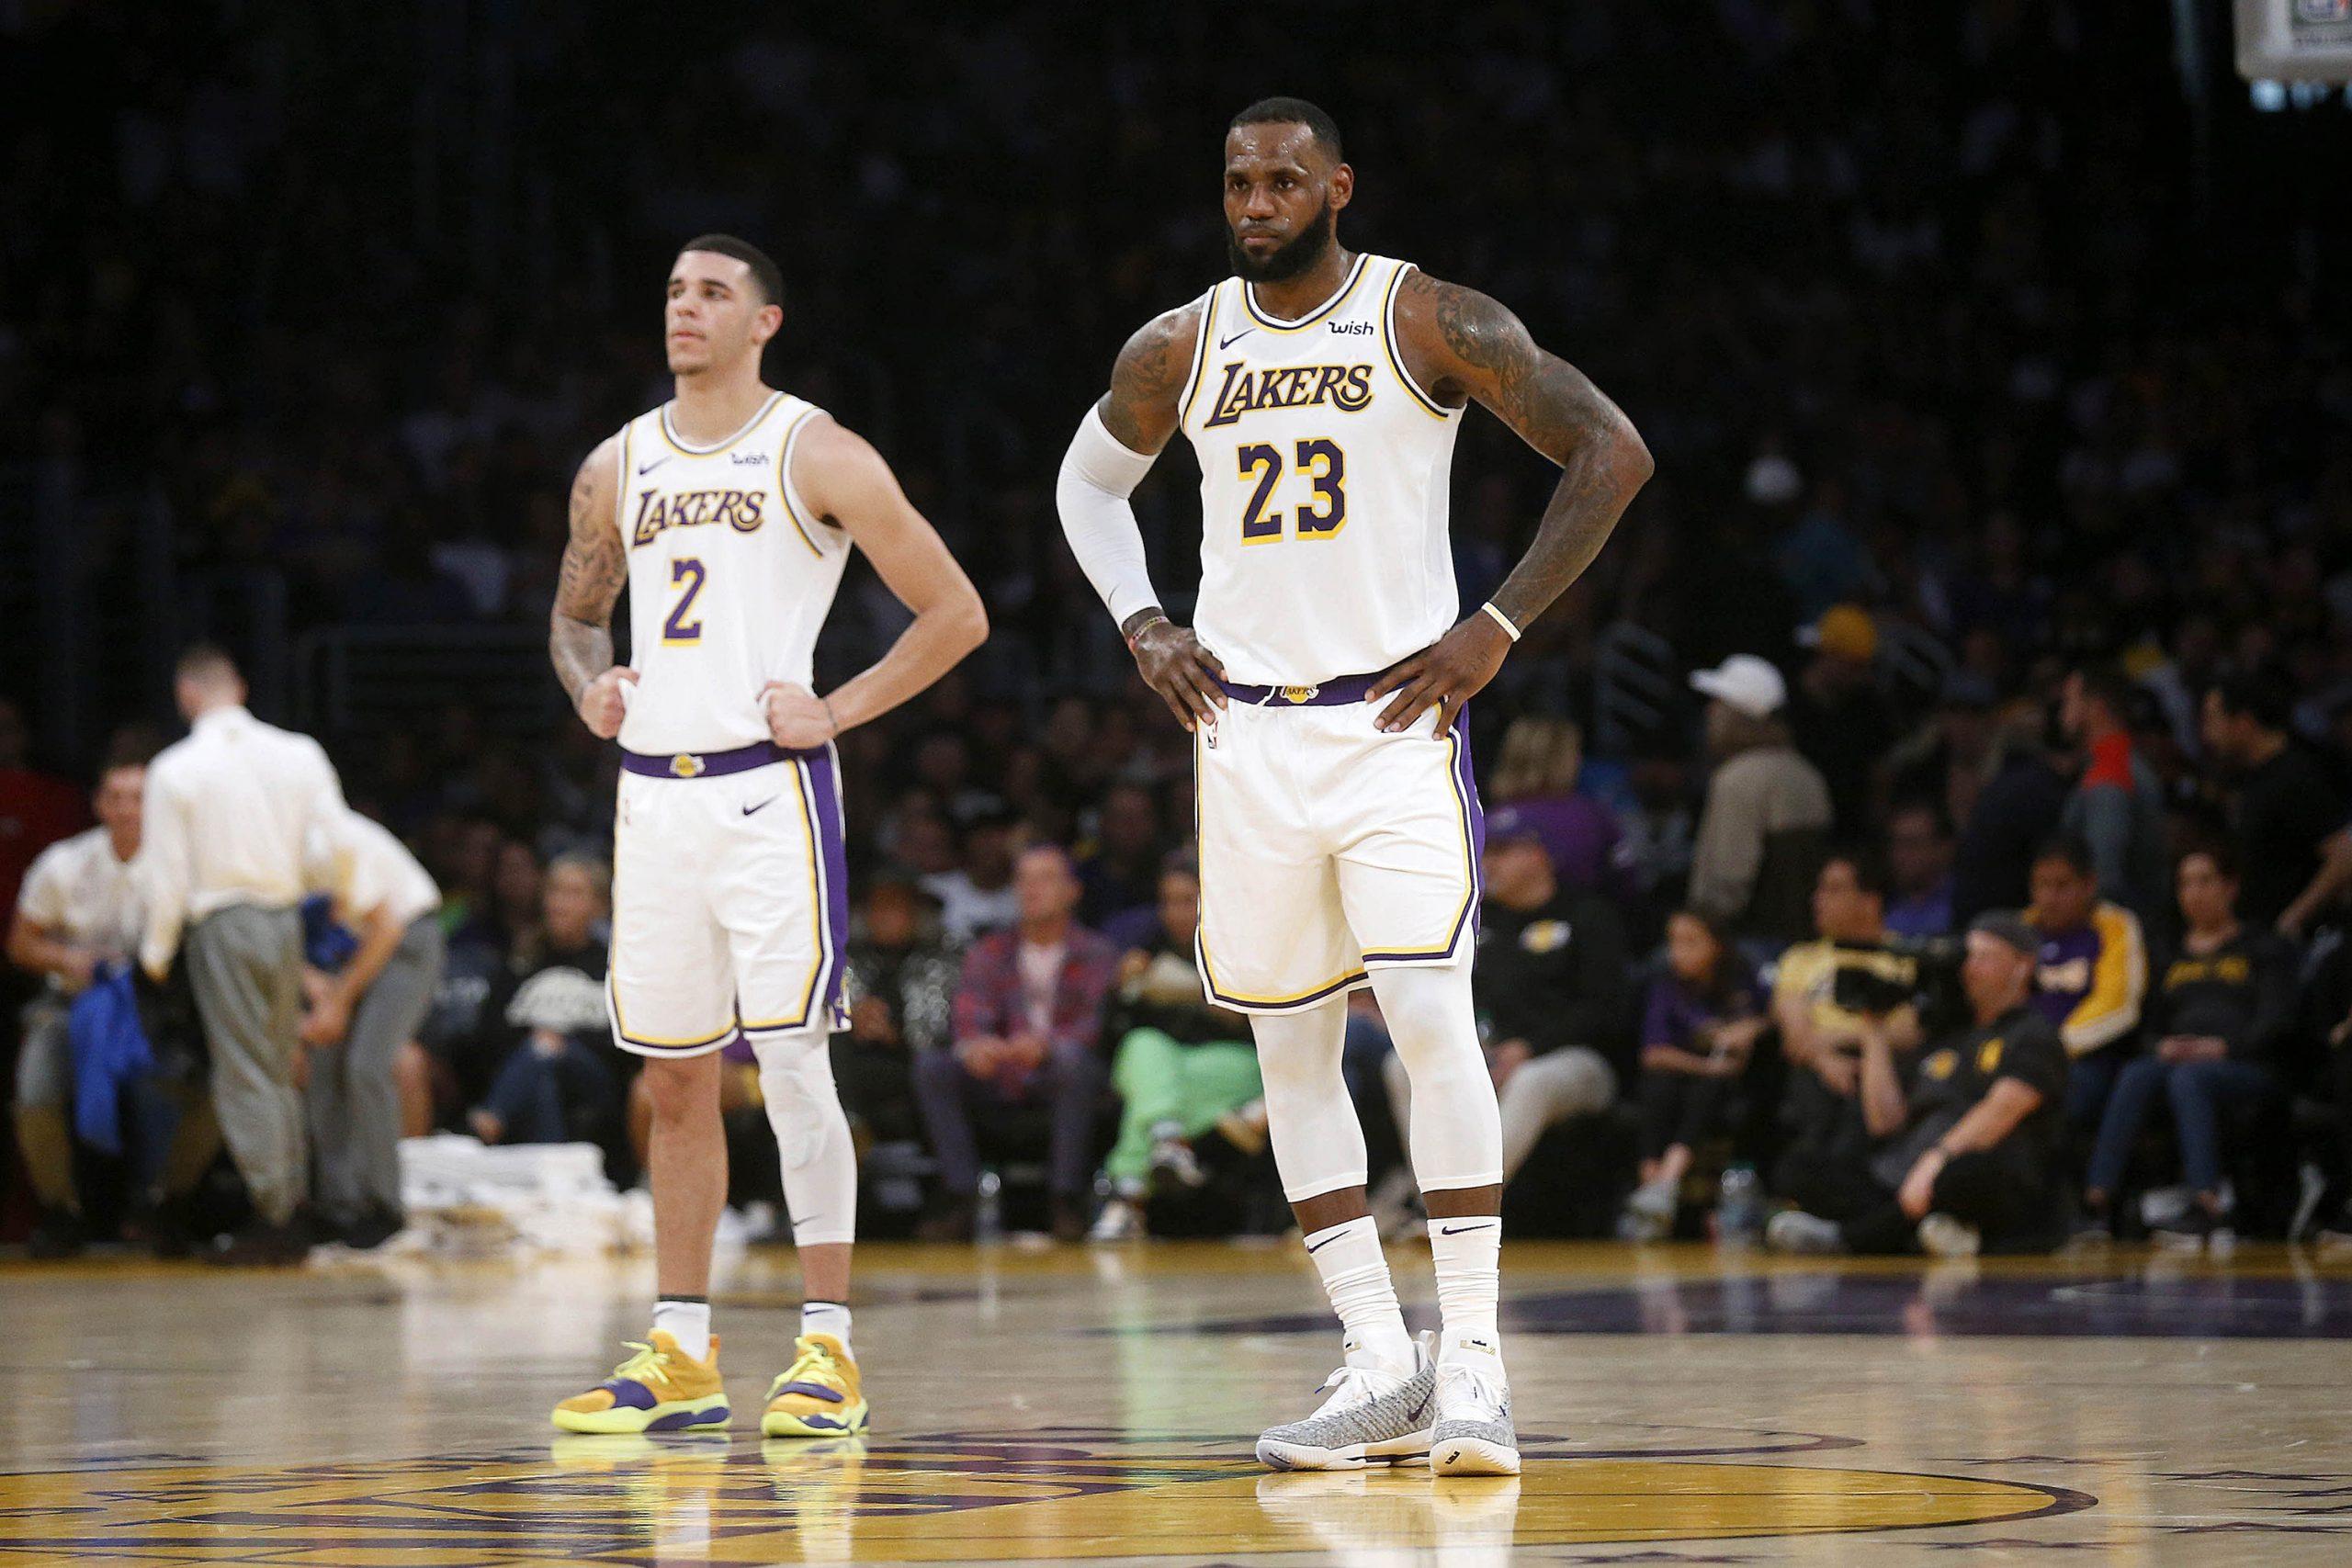 Los Angeles Lakers guard Lonzo Ball (2) and Los Angeles Lakers forward LeBron James (23) during a game against the Orlando Magic on Sunday, Nov. 25, 2018 at the Staples Center in Los Angeles. (Gary Coronado /Los Angeles Times/TNS)